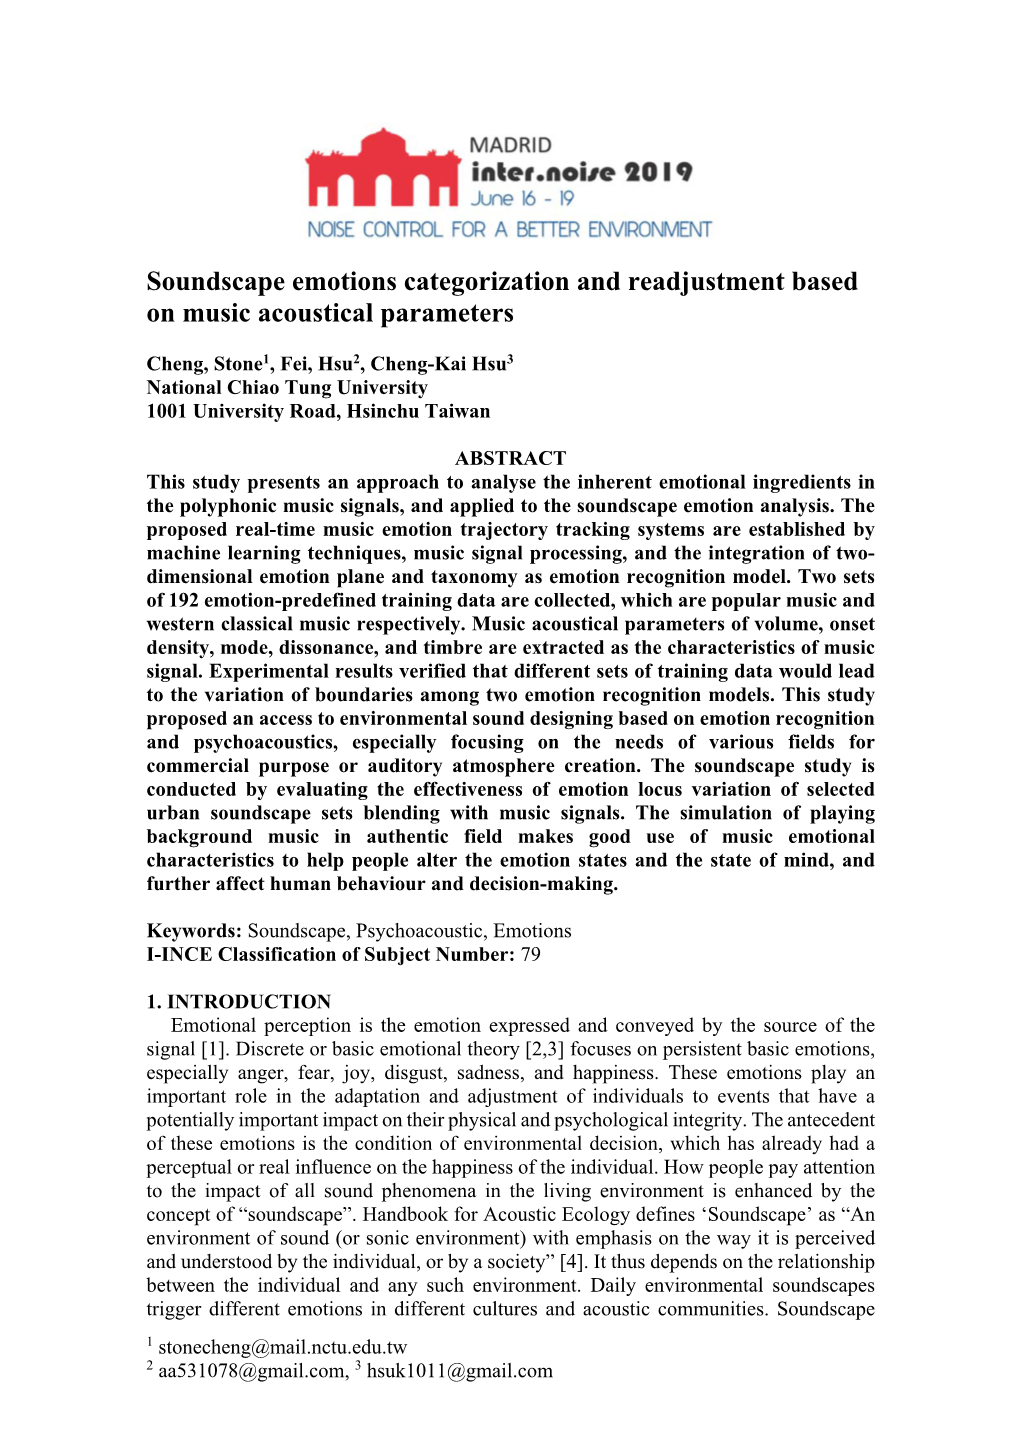 Soundscape Emotions Categorization and Readjustment Based on Music Acoustical Parameters